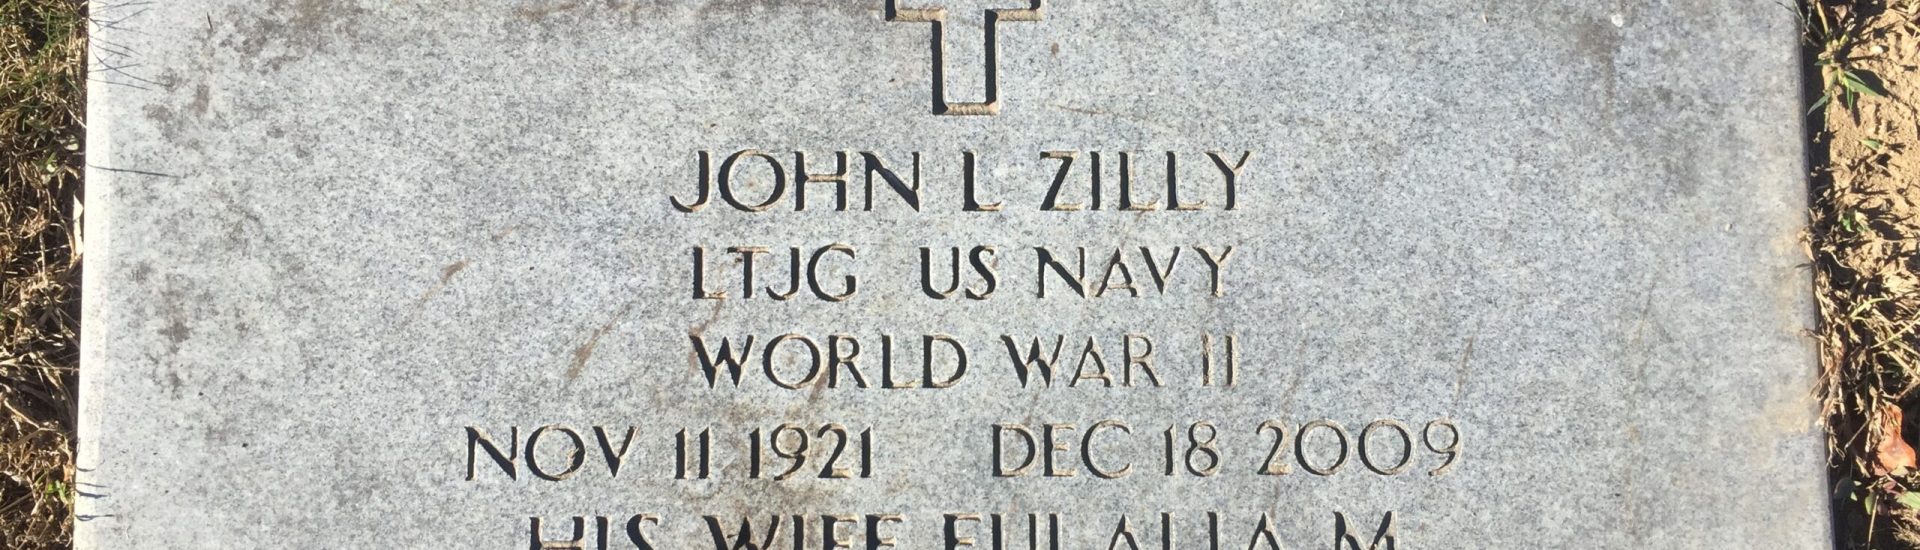 Jack Zilly